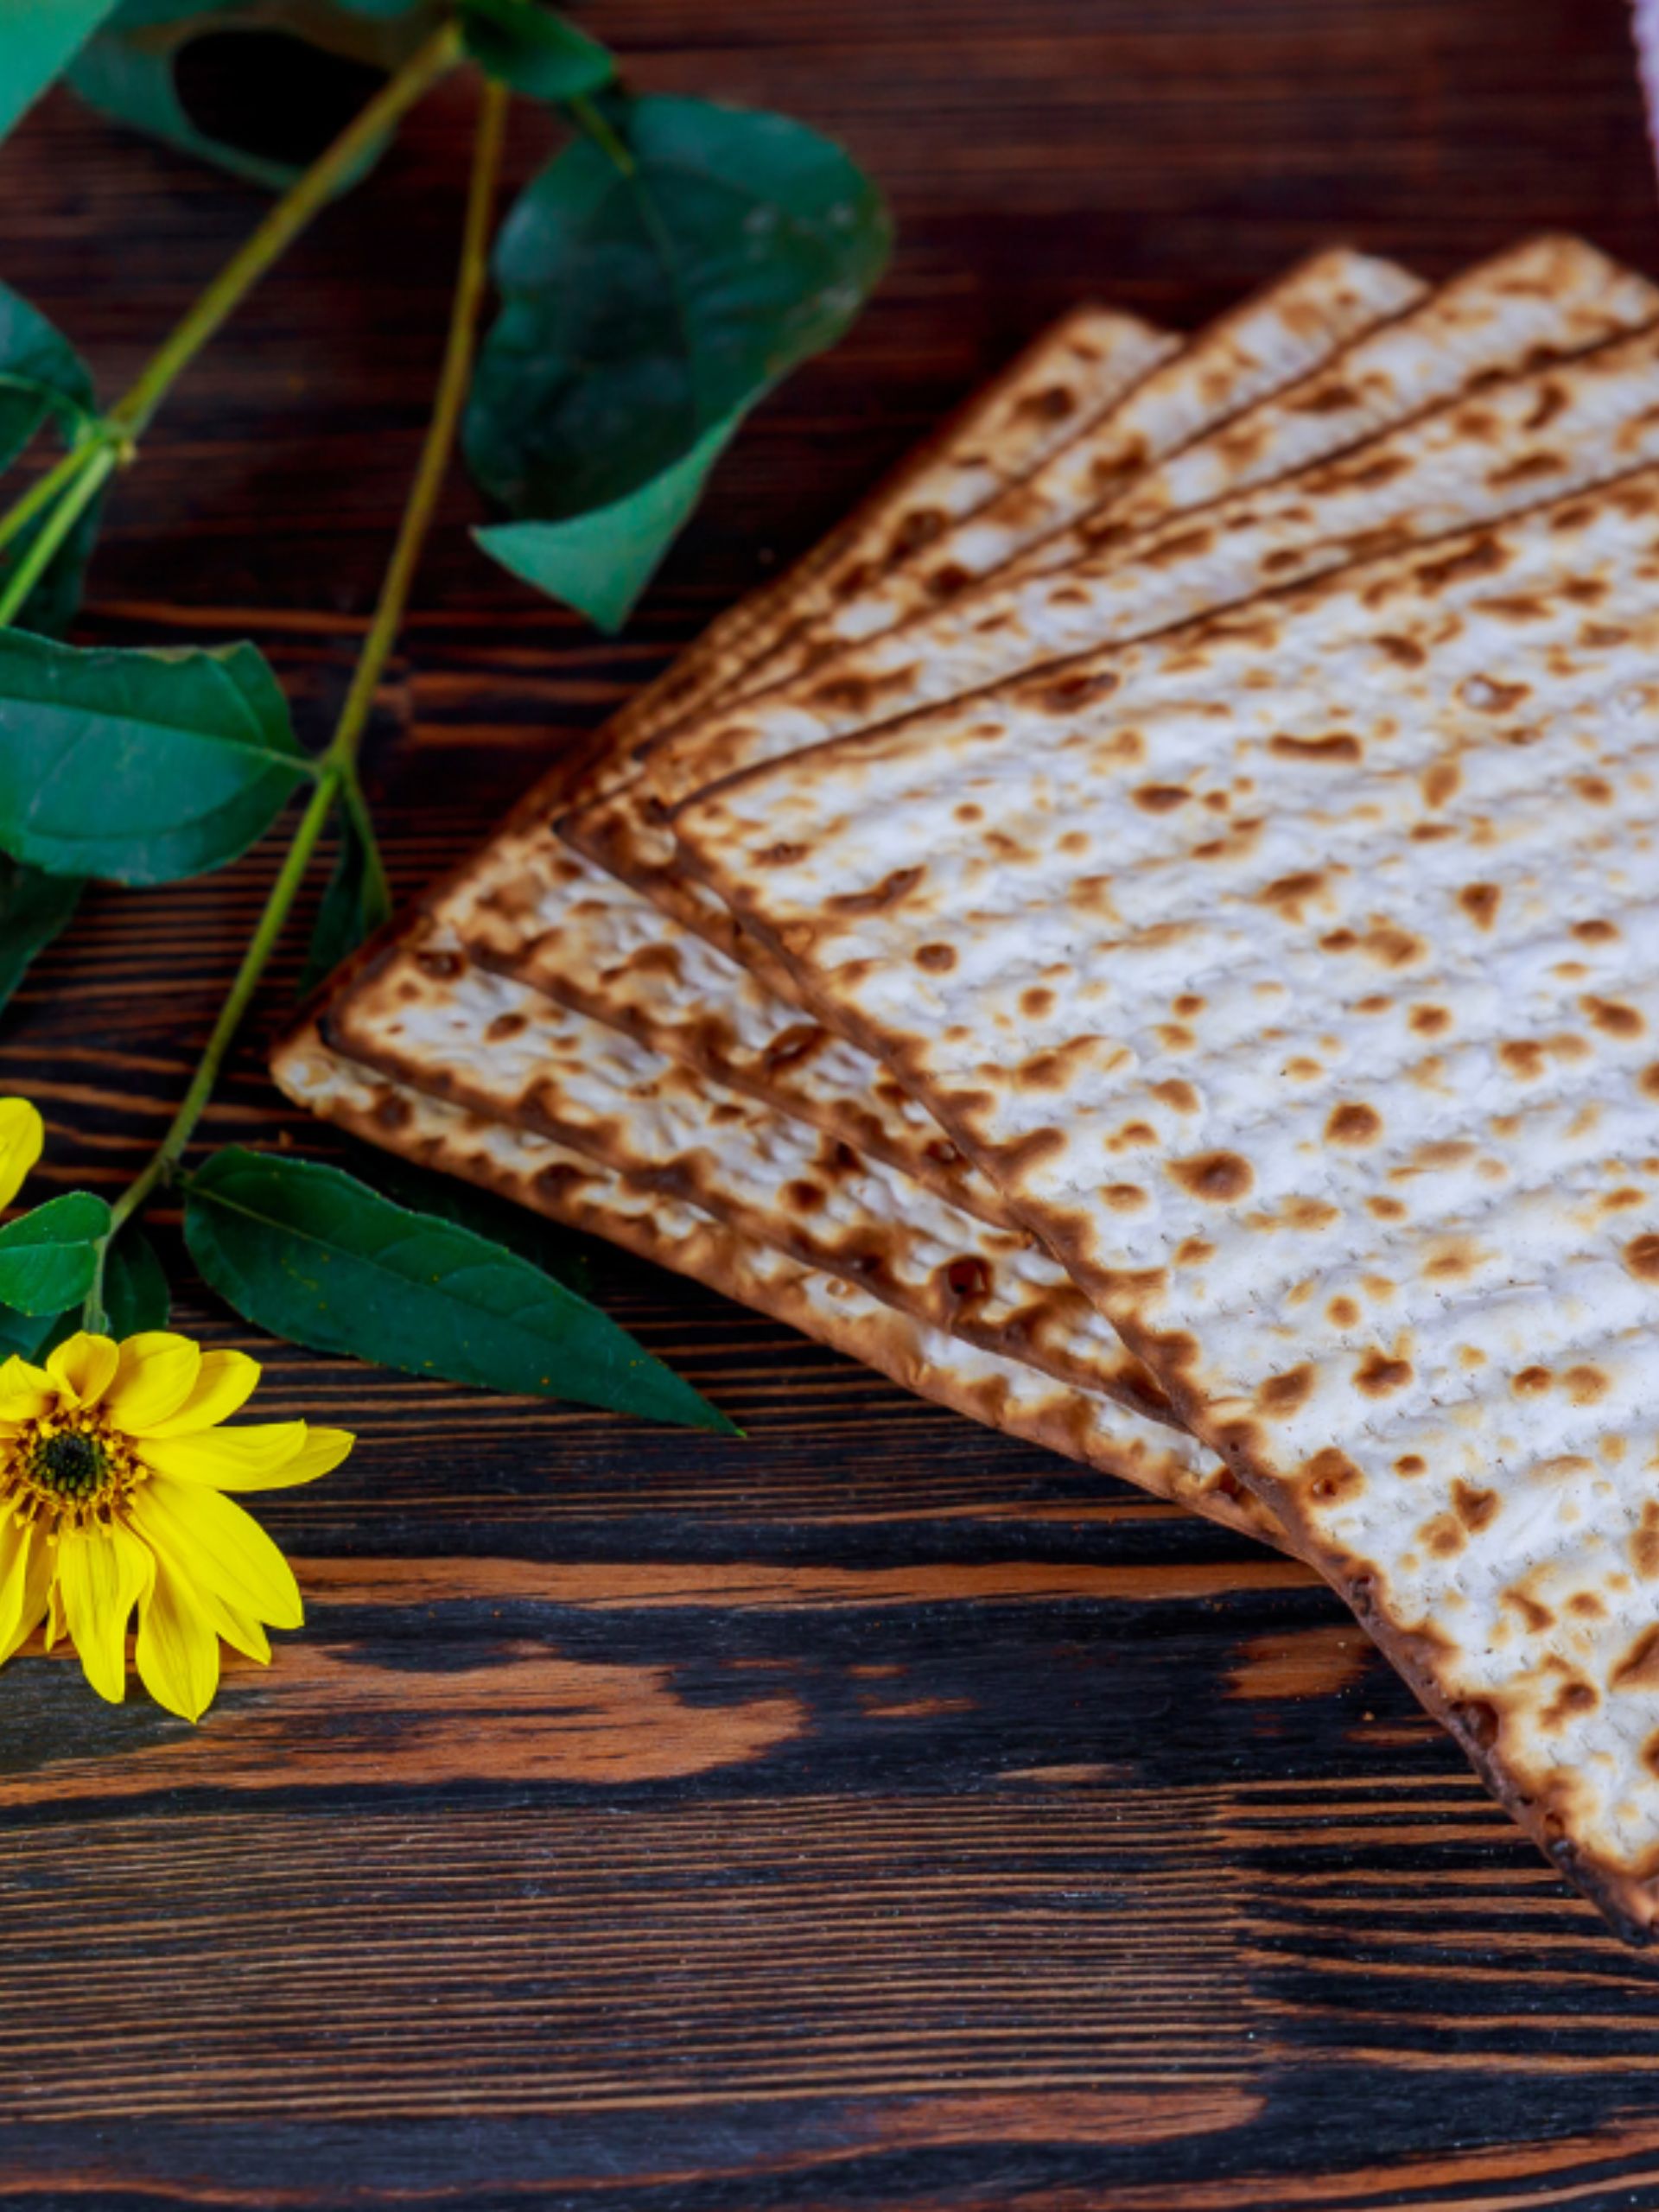 Replace Bread During Passover